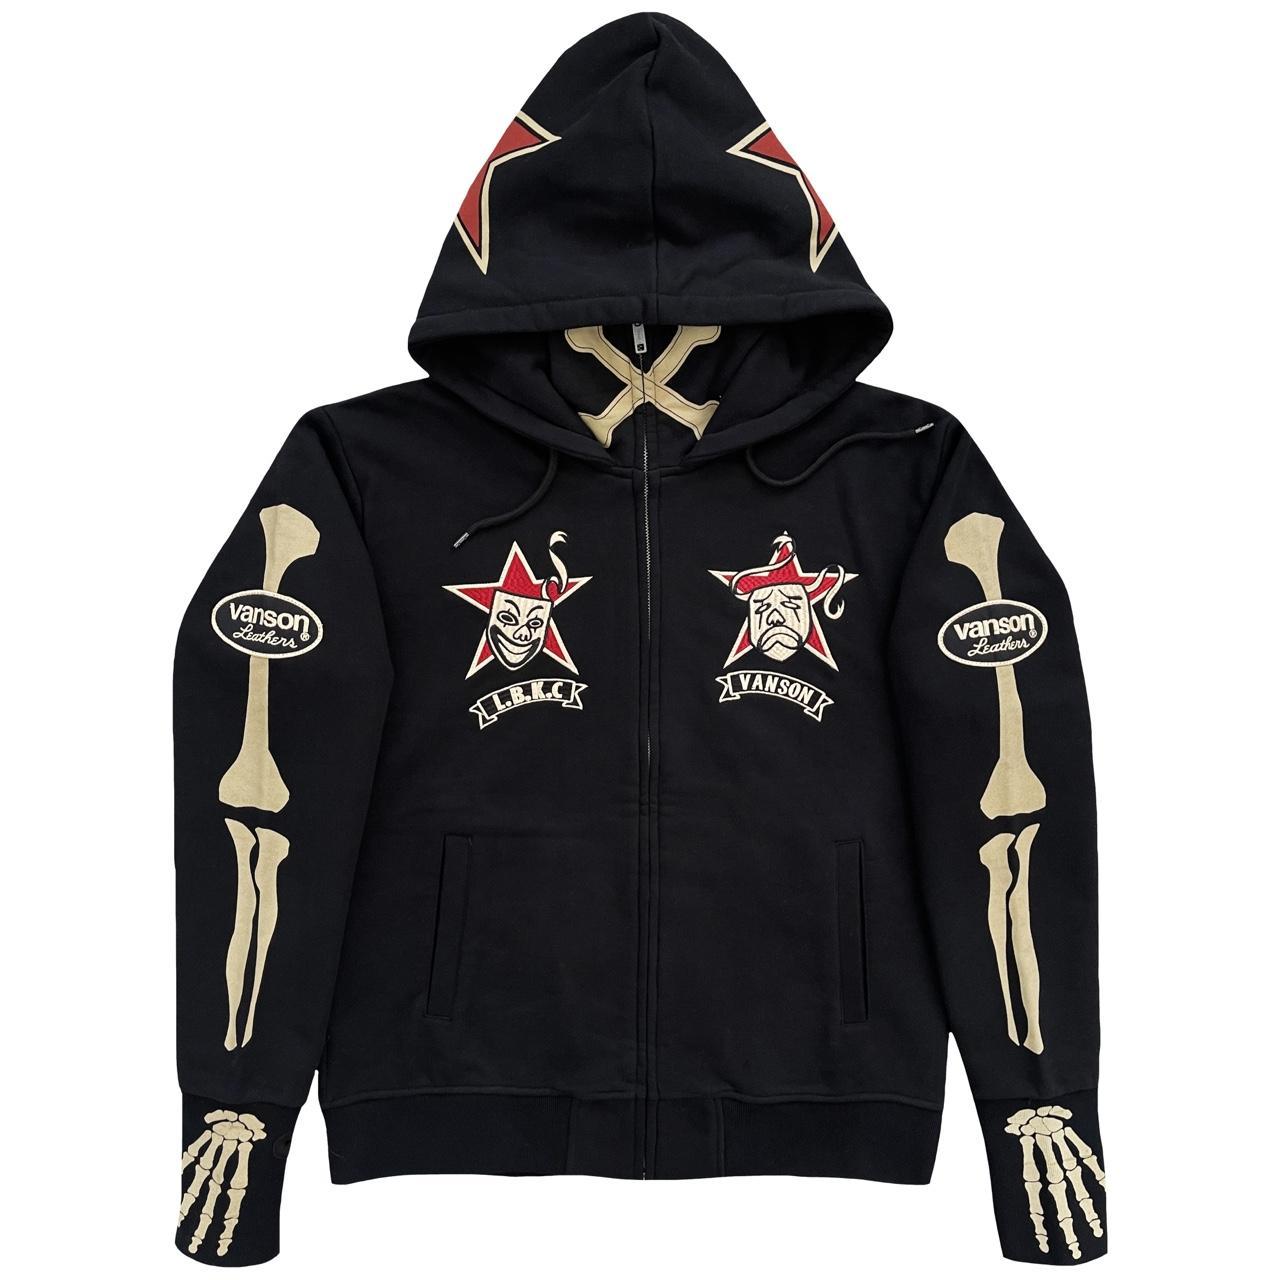 Vanson Leathers x Low Blow Hoodie – The Holy Grail